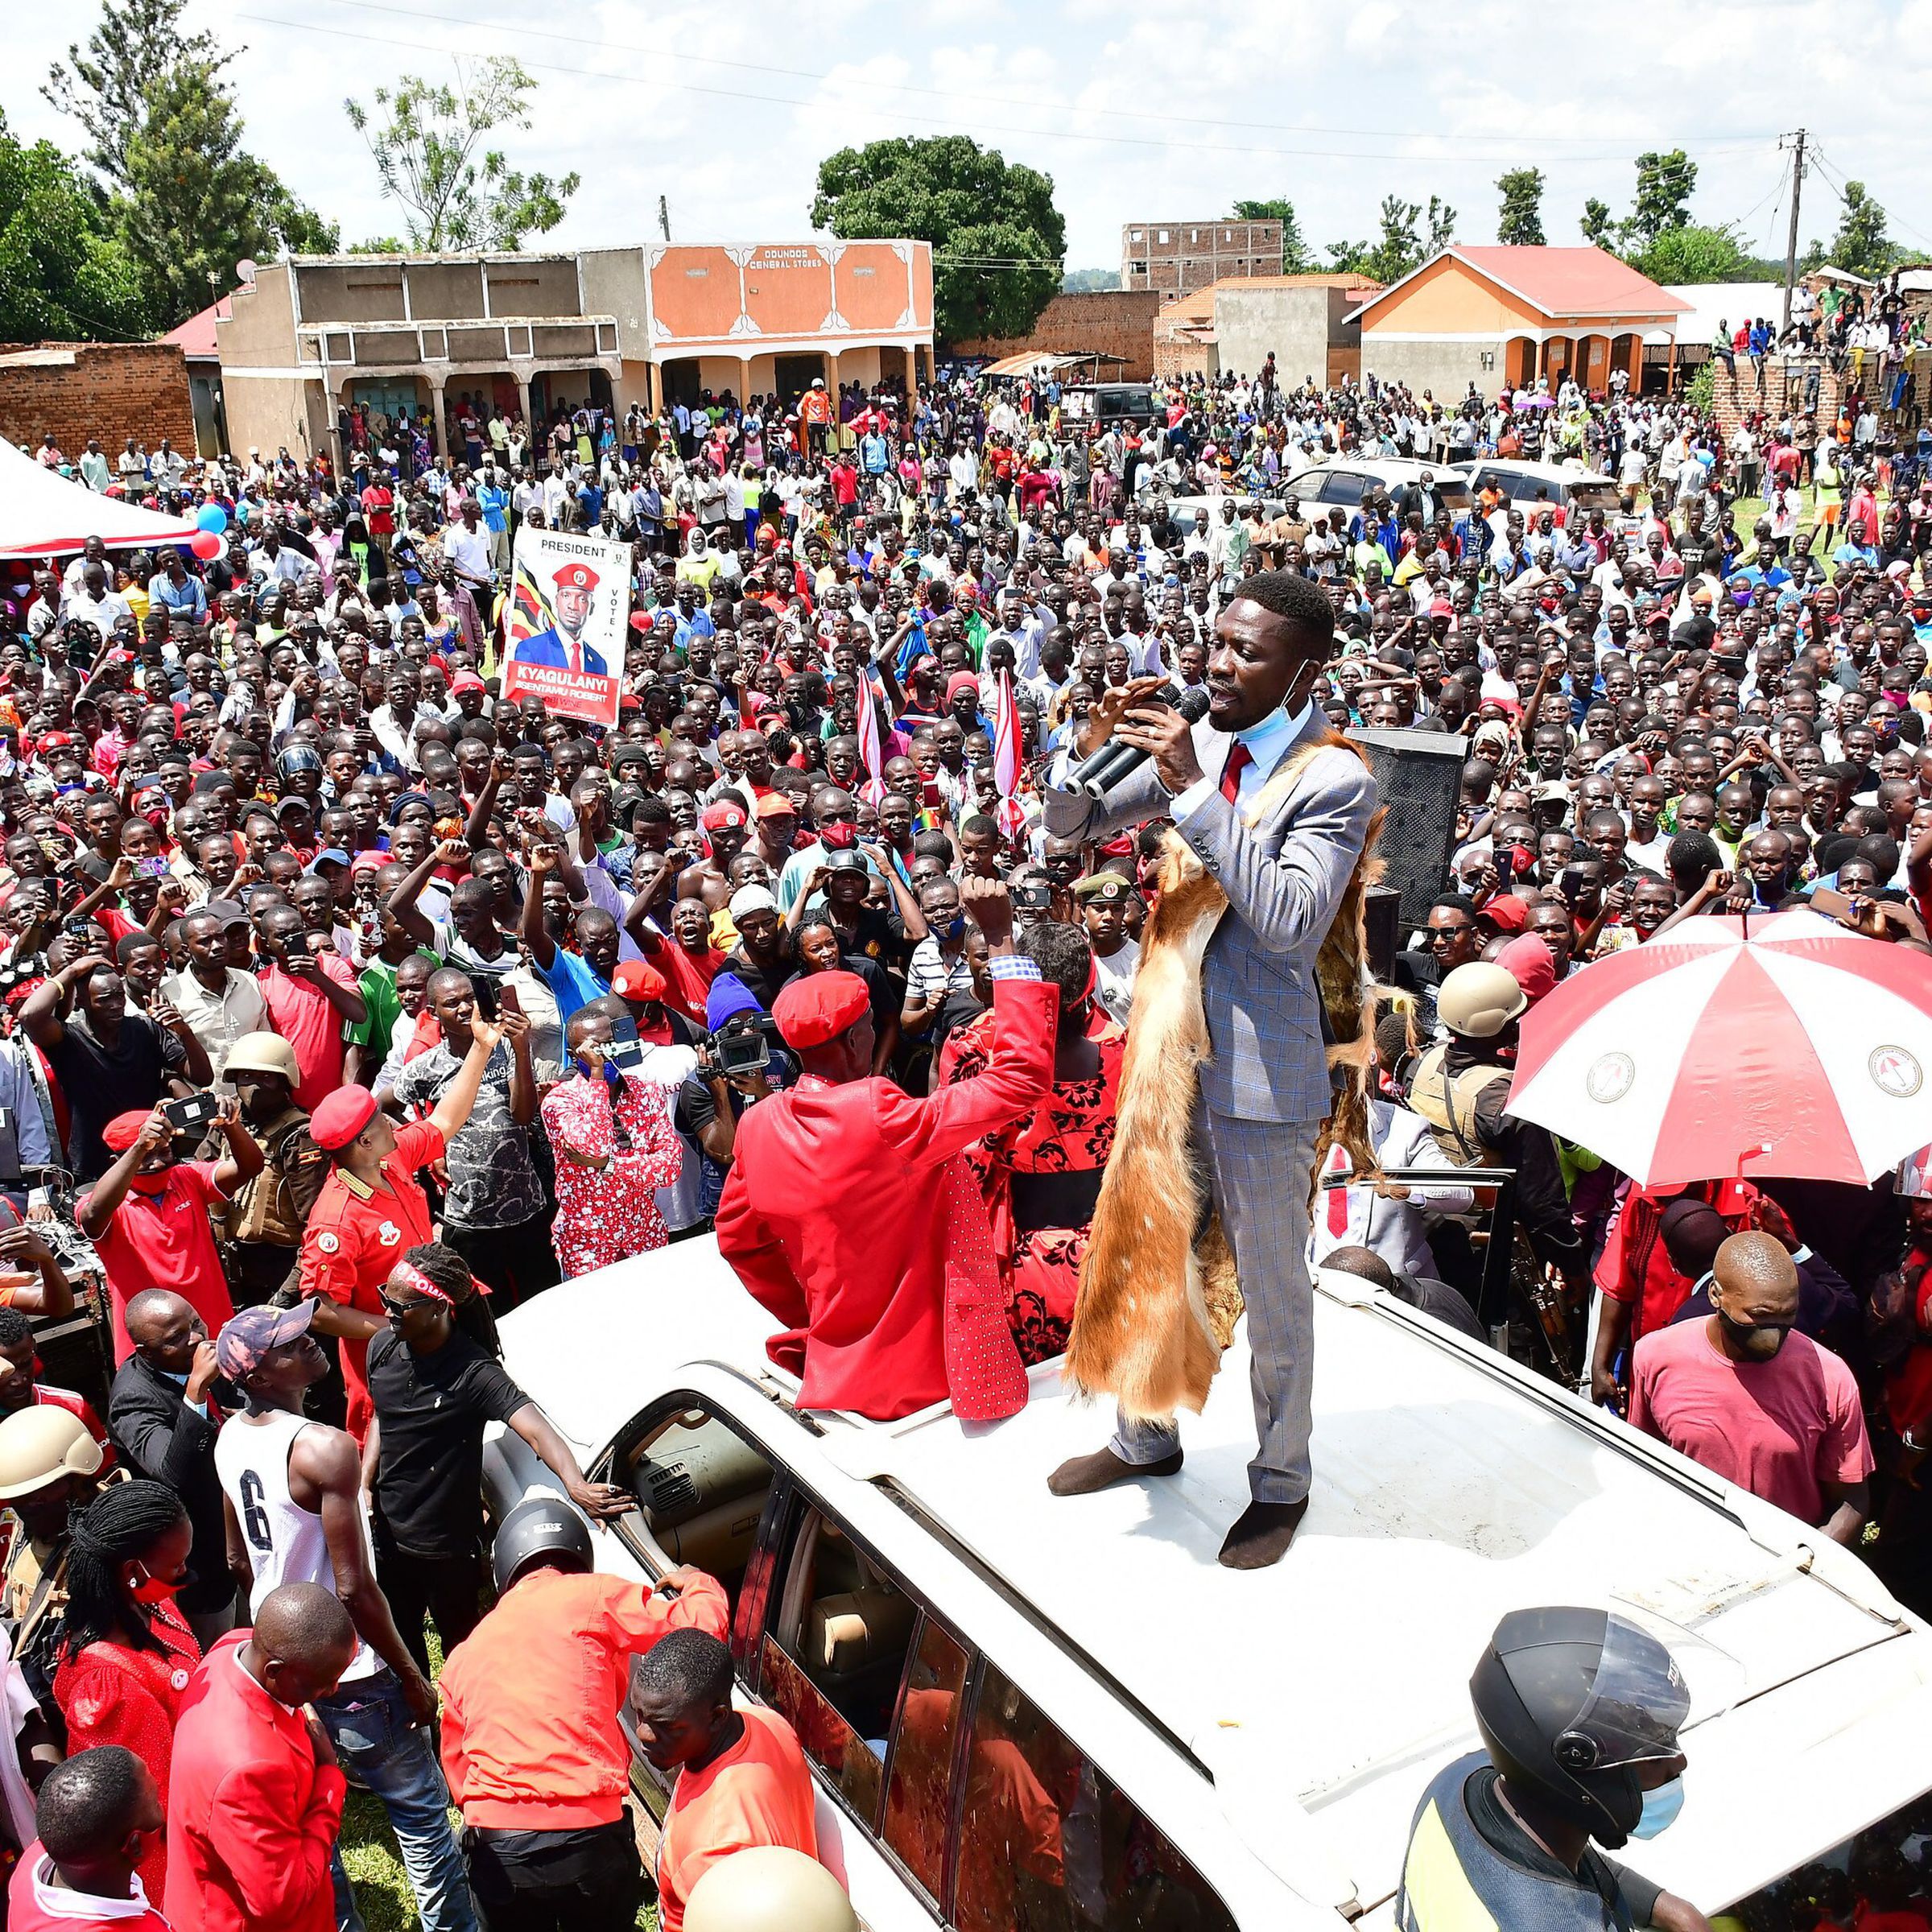 Robert Kyagulanyi Ssentamu (standing on roof of the vehicle), a candidate in Uganda’s general elections in 2021 and widely regarded as the closest challenger to incumbent Yoweri Museveni, campaigns in Butaleja district in the country’s East on November 17, 2020.